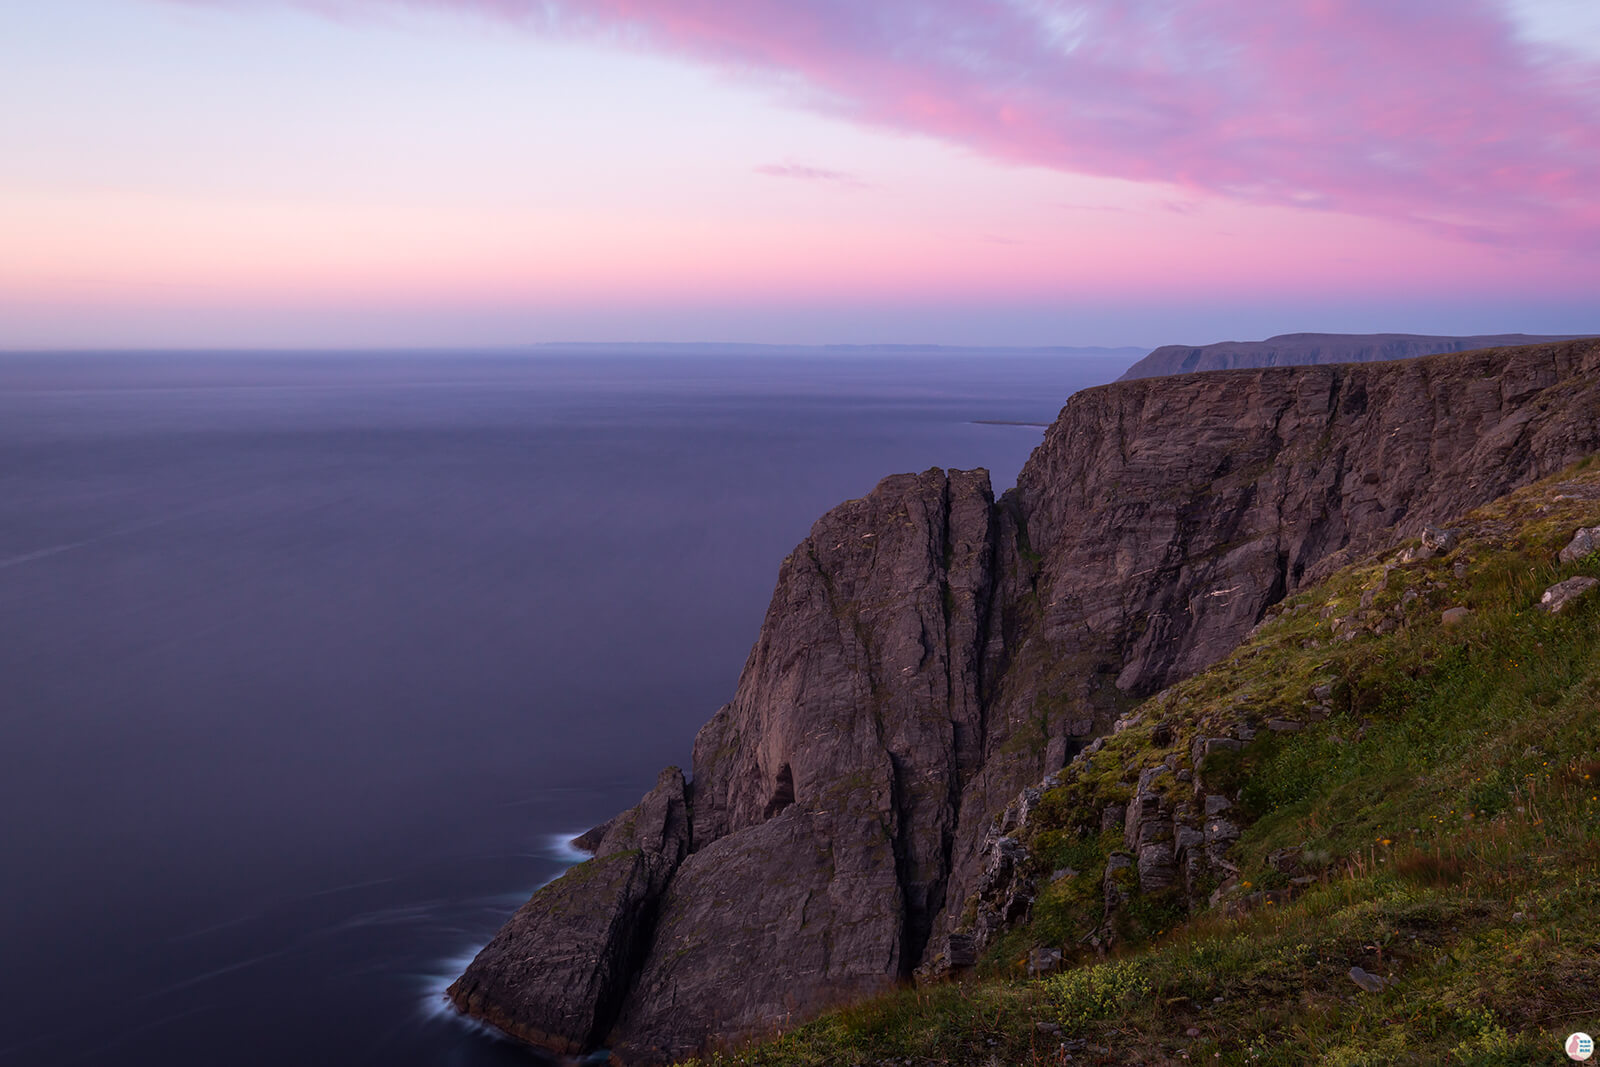 Sunset at North Cape, Nordkapp, Northern Norway